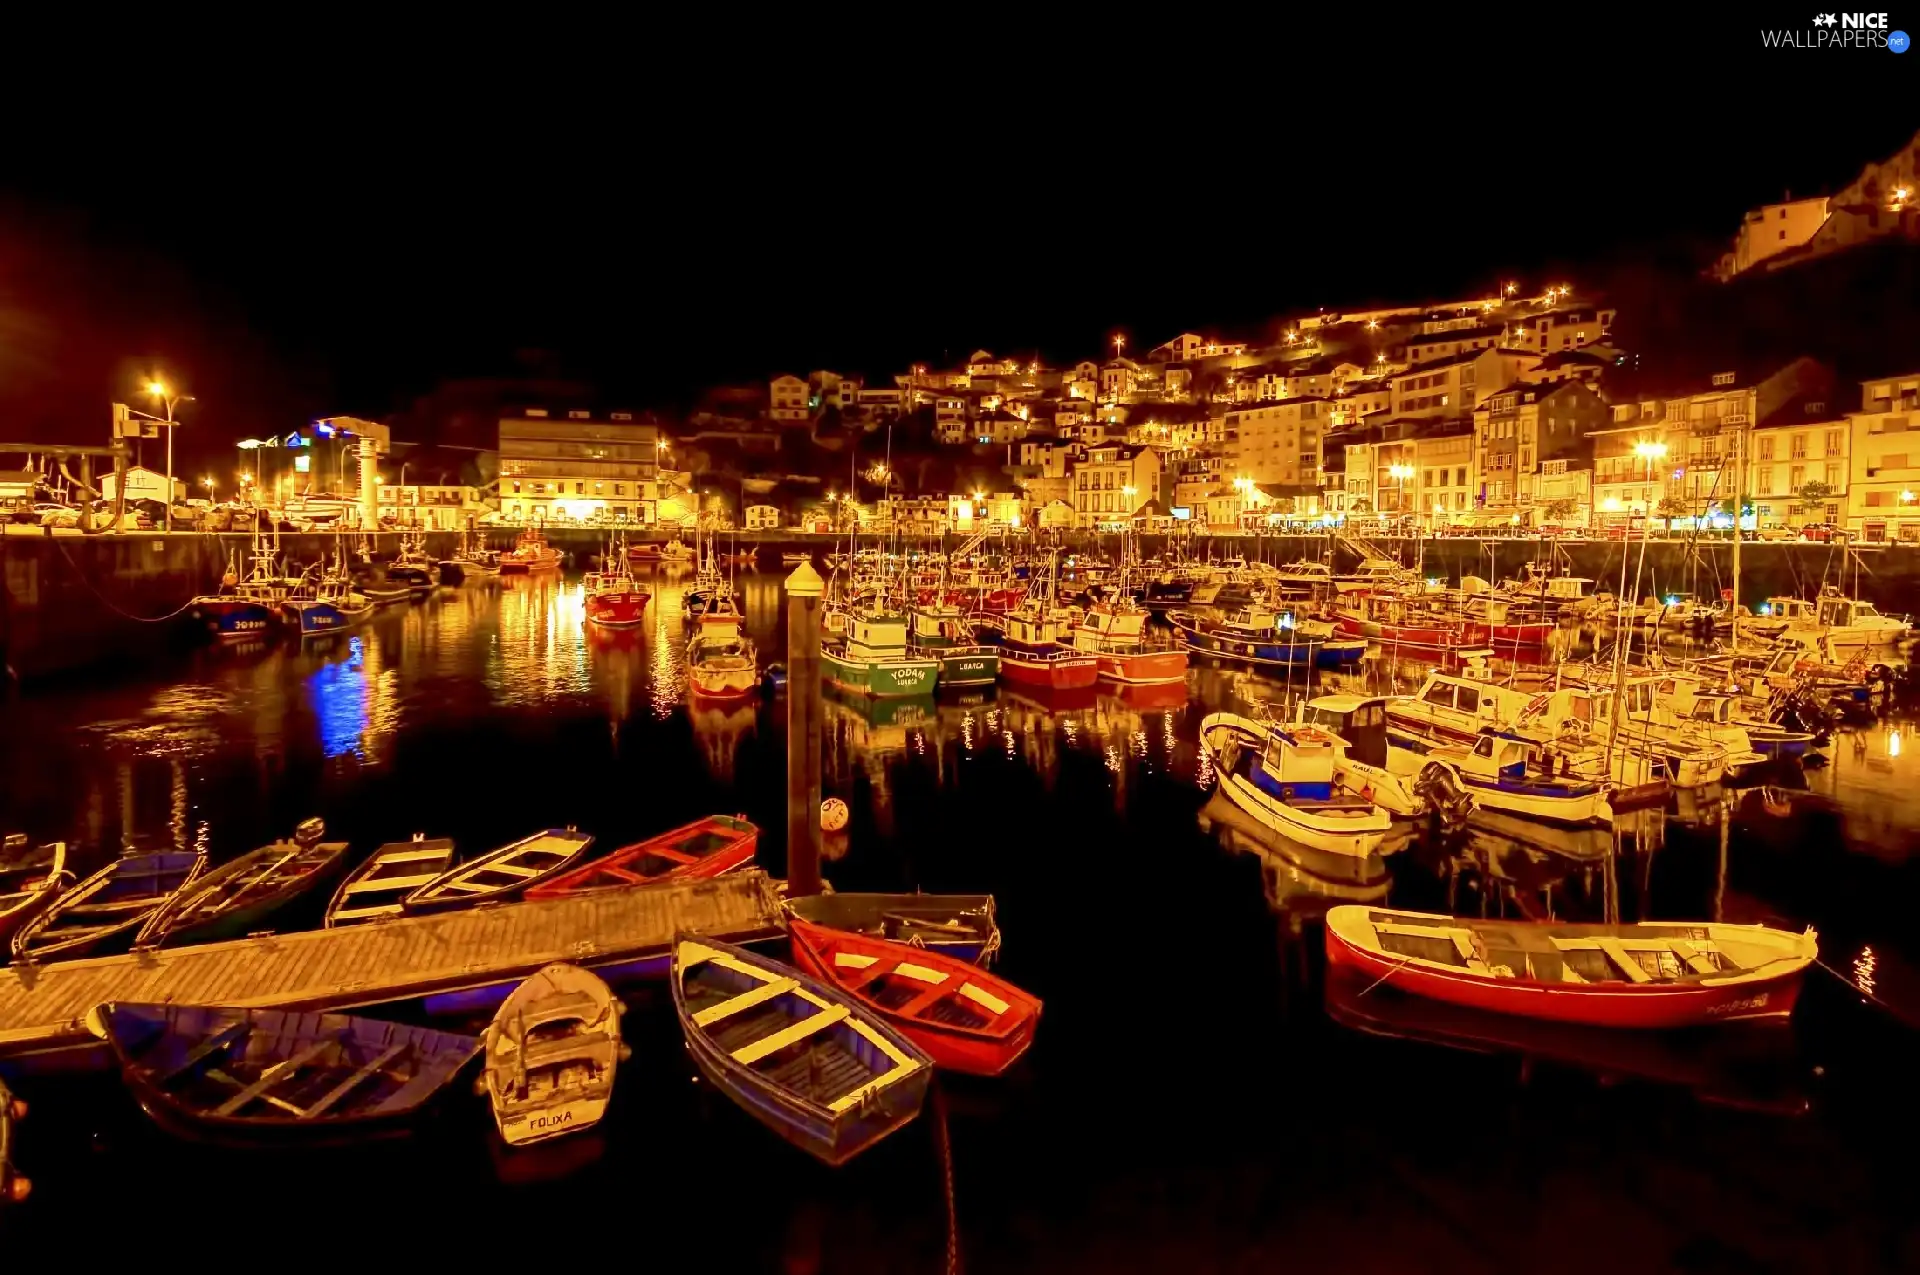 port, Town, night, Yachts